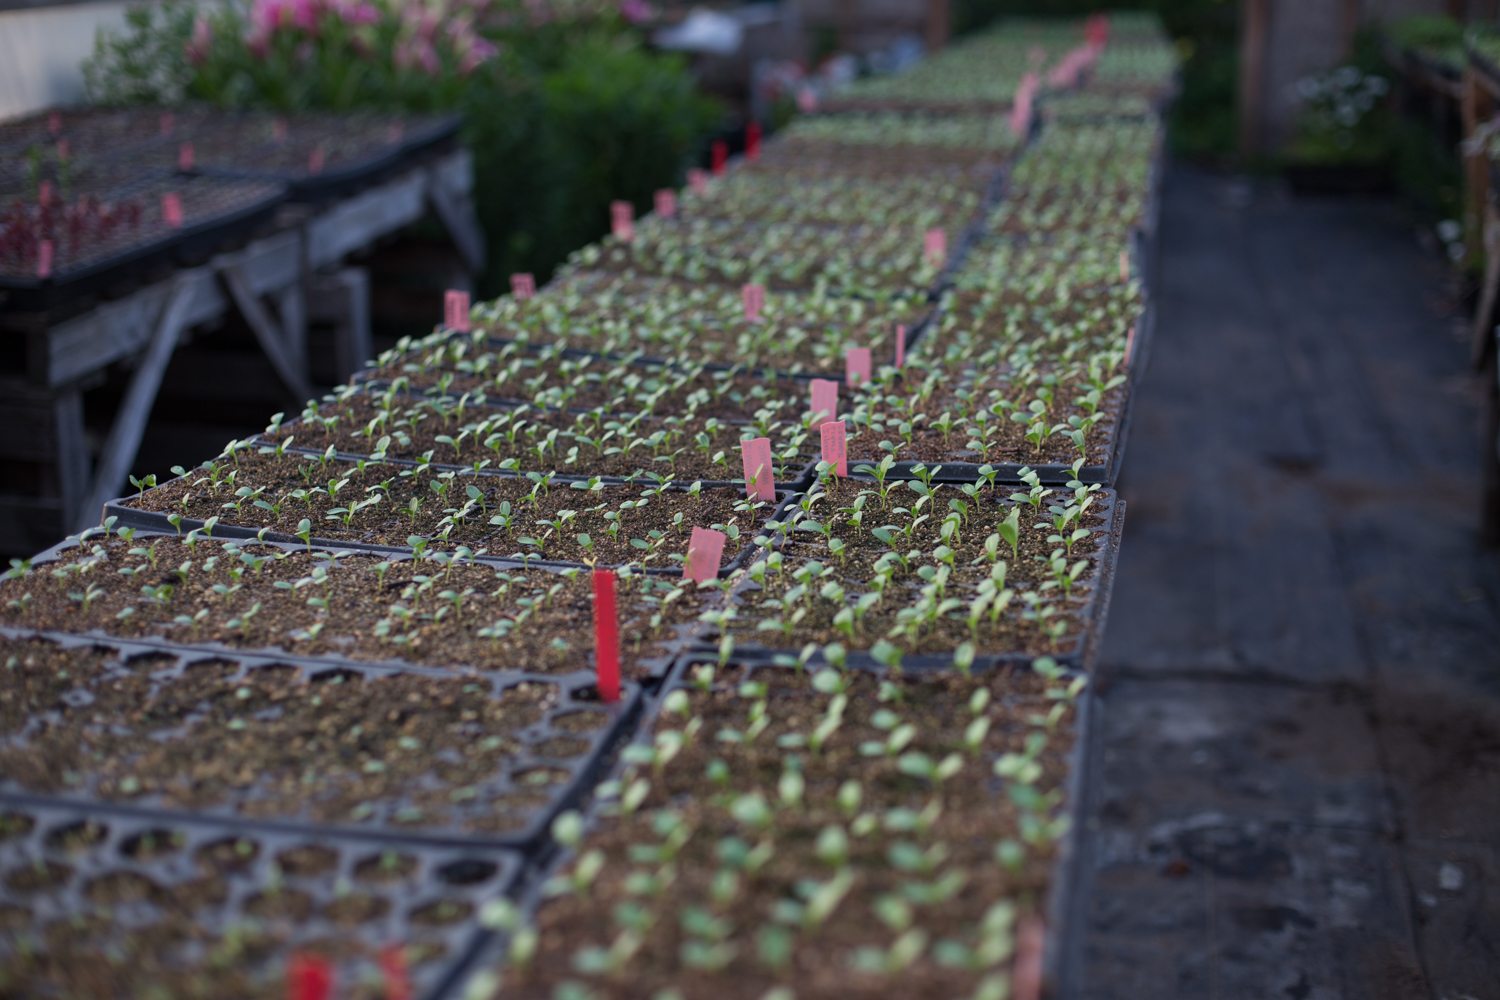 Trays of seedlings growing in a greenhouse